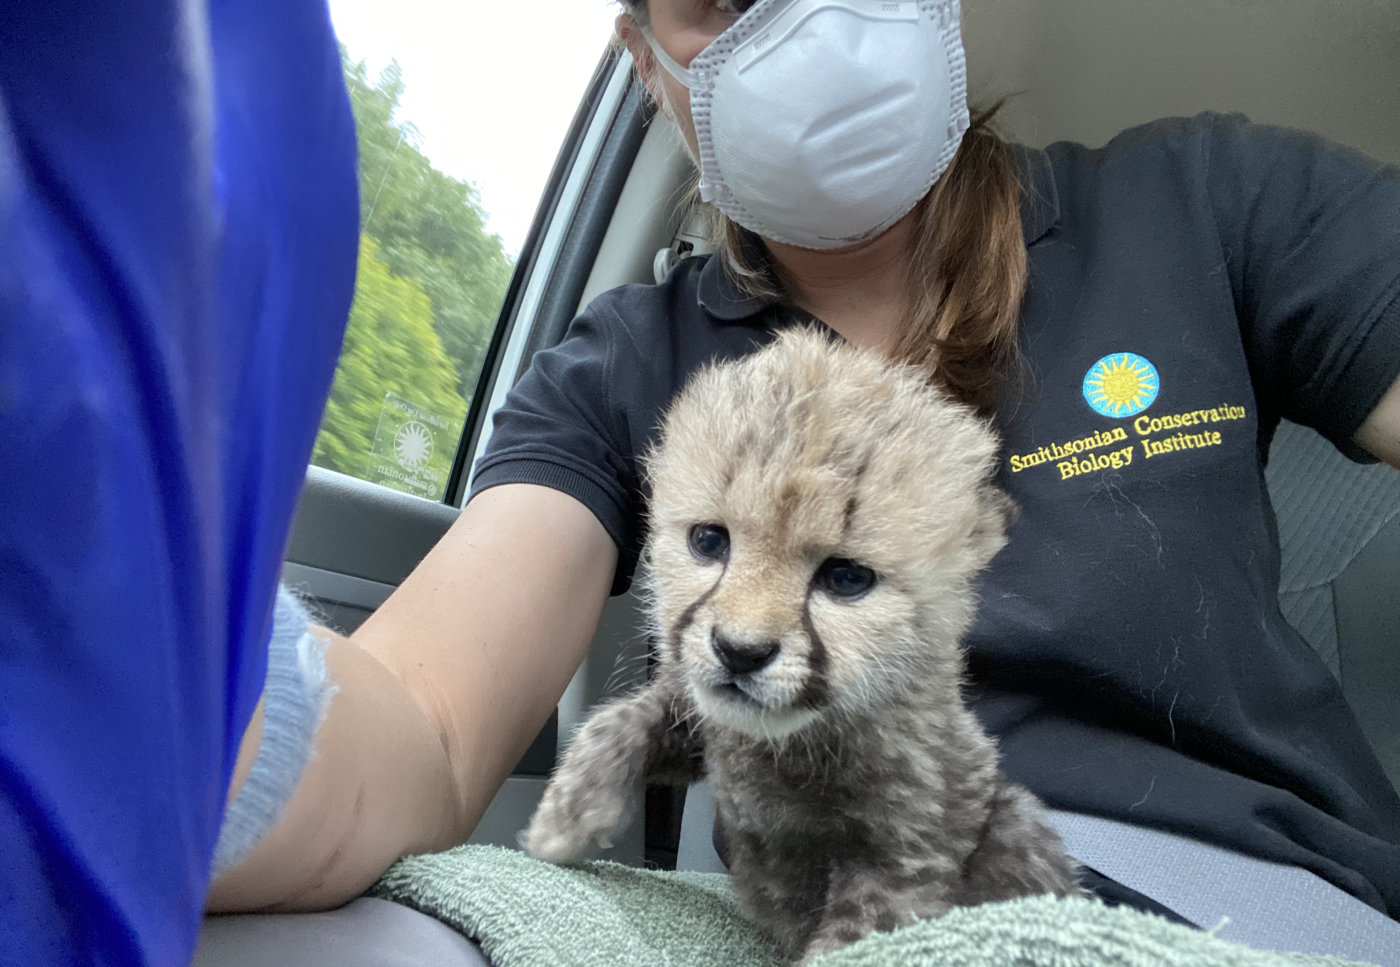 Adrienne Crosier sits in a car with a 16-day-old cheetah cub on her lap. The cub partially stands, partially lays on a light green towel. Adrienne takes a selfie of the cub from the cubs level.